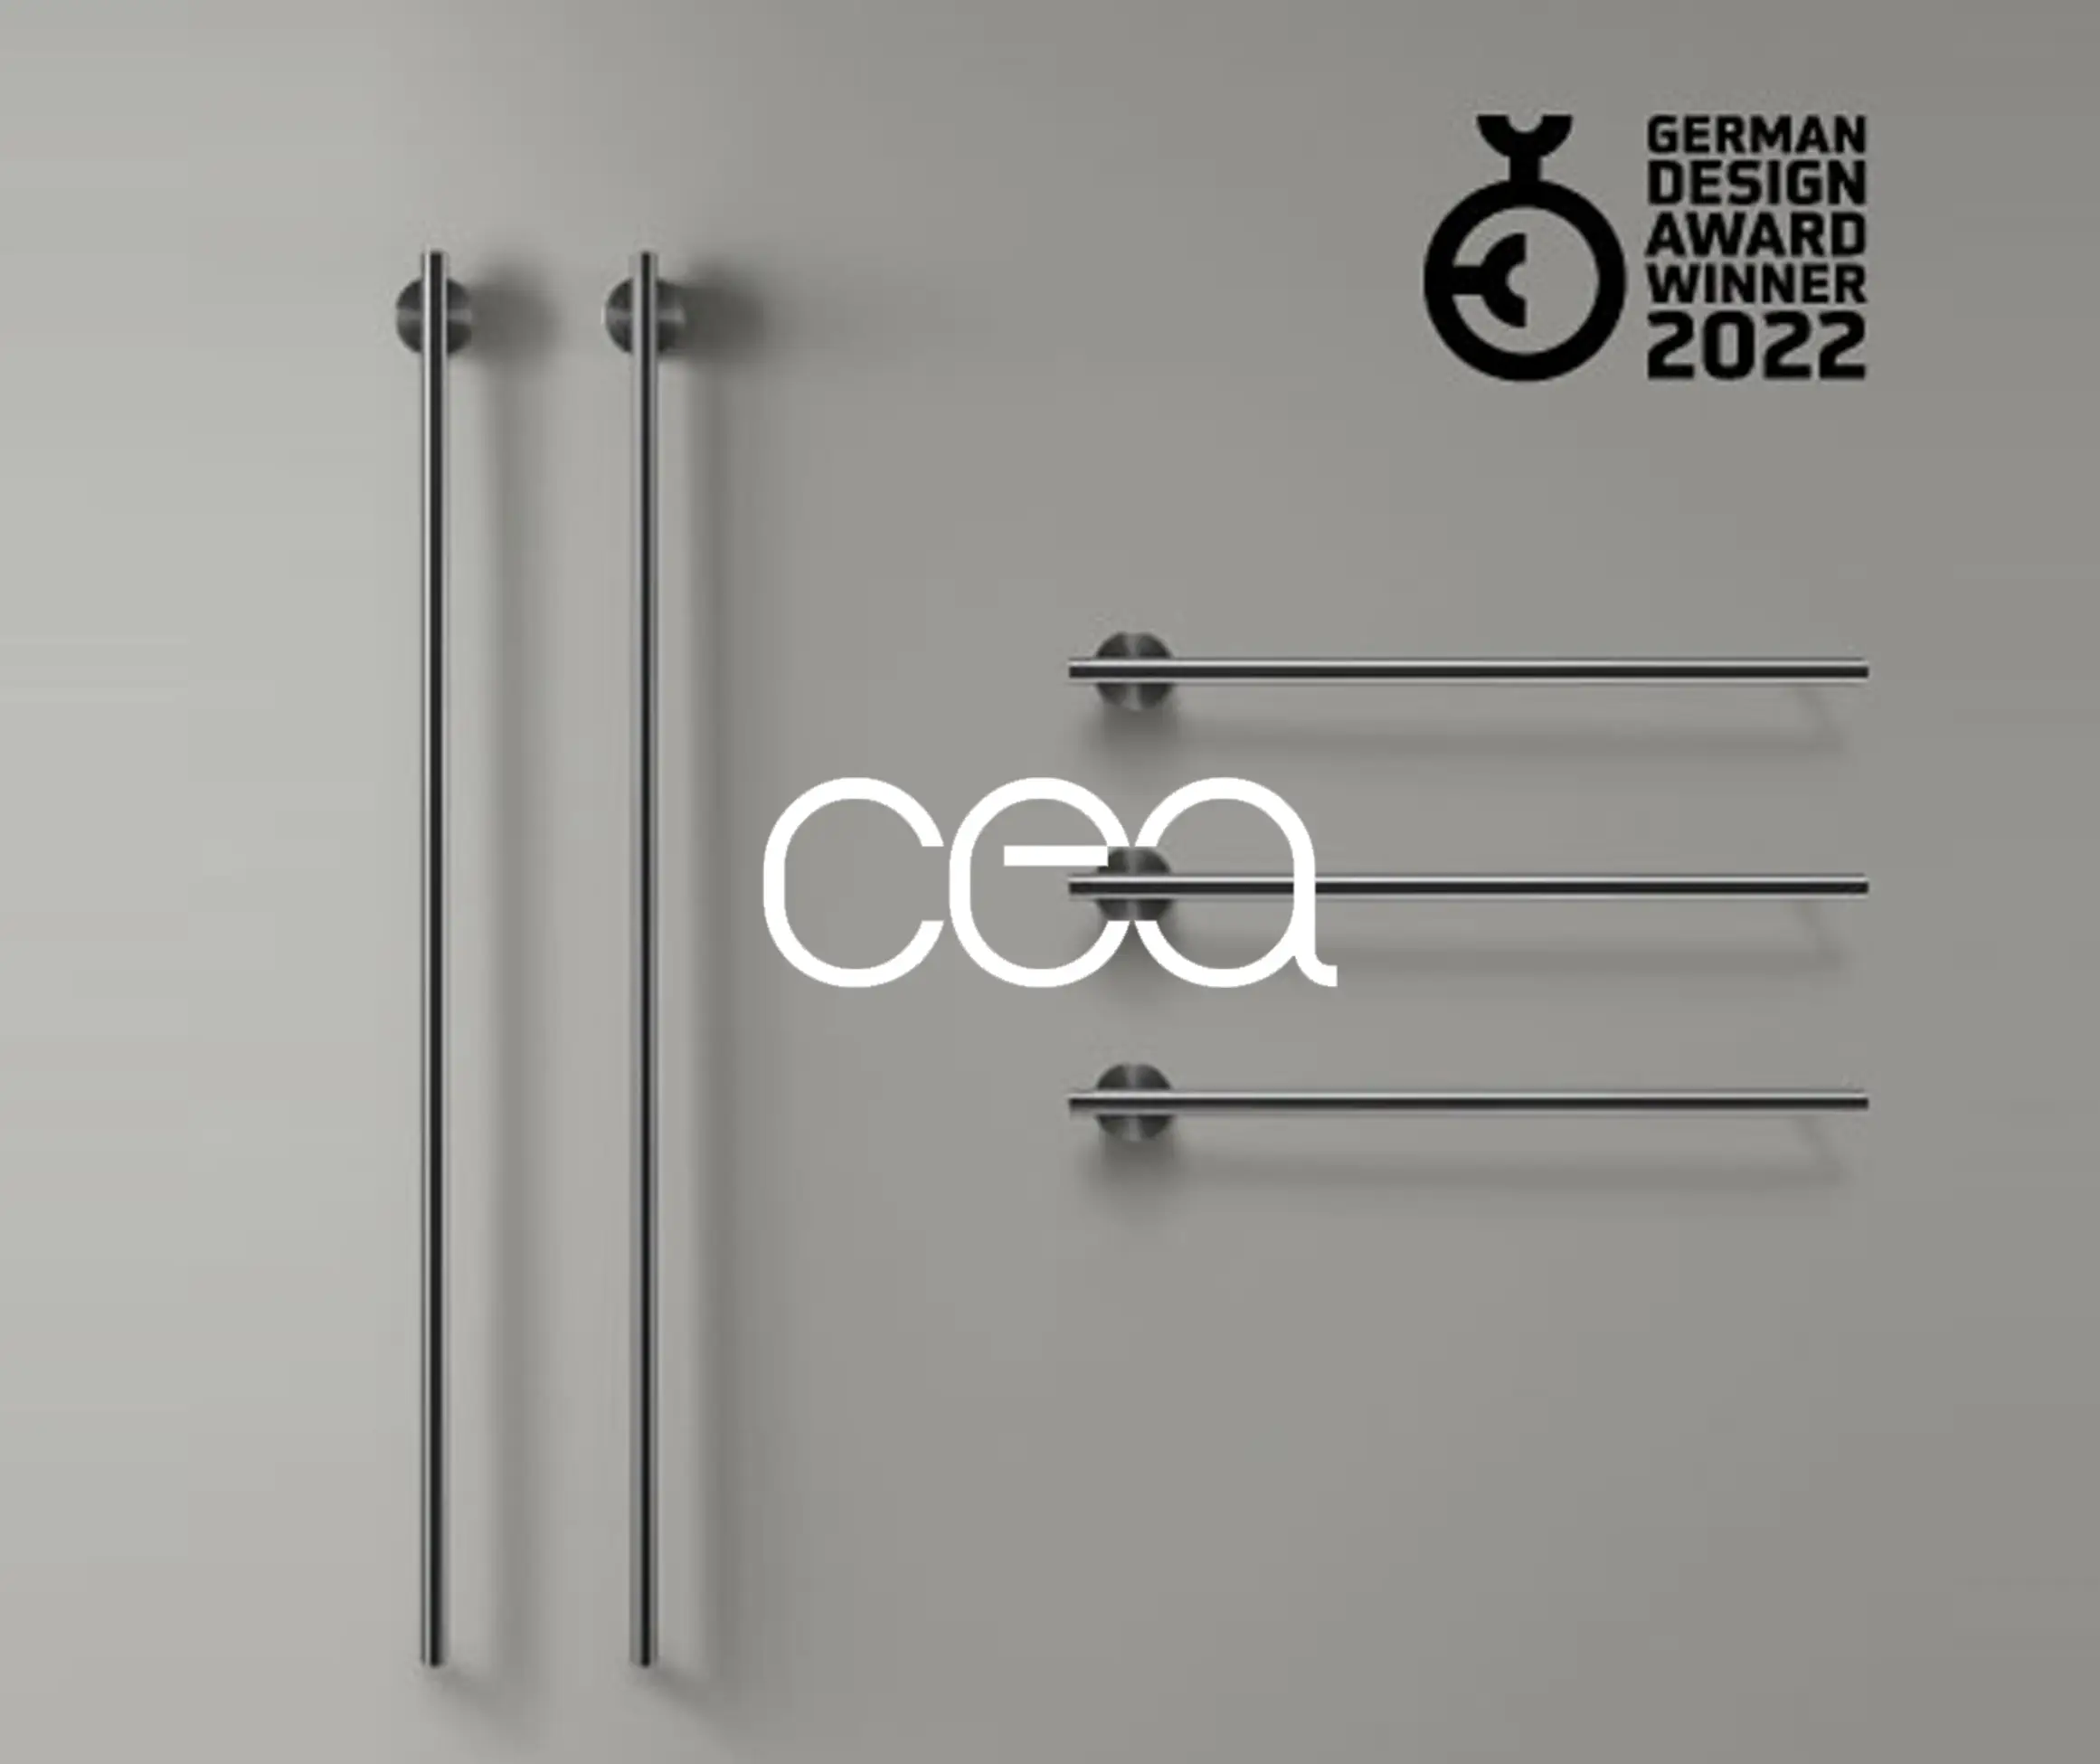 Geahchan group geahchangroup high end homewares and sanitary in lebanon cea design equilibrio wins the german design awards 2022